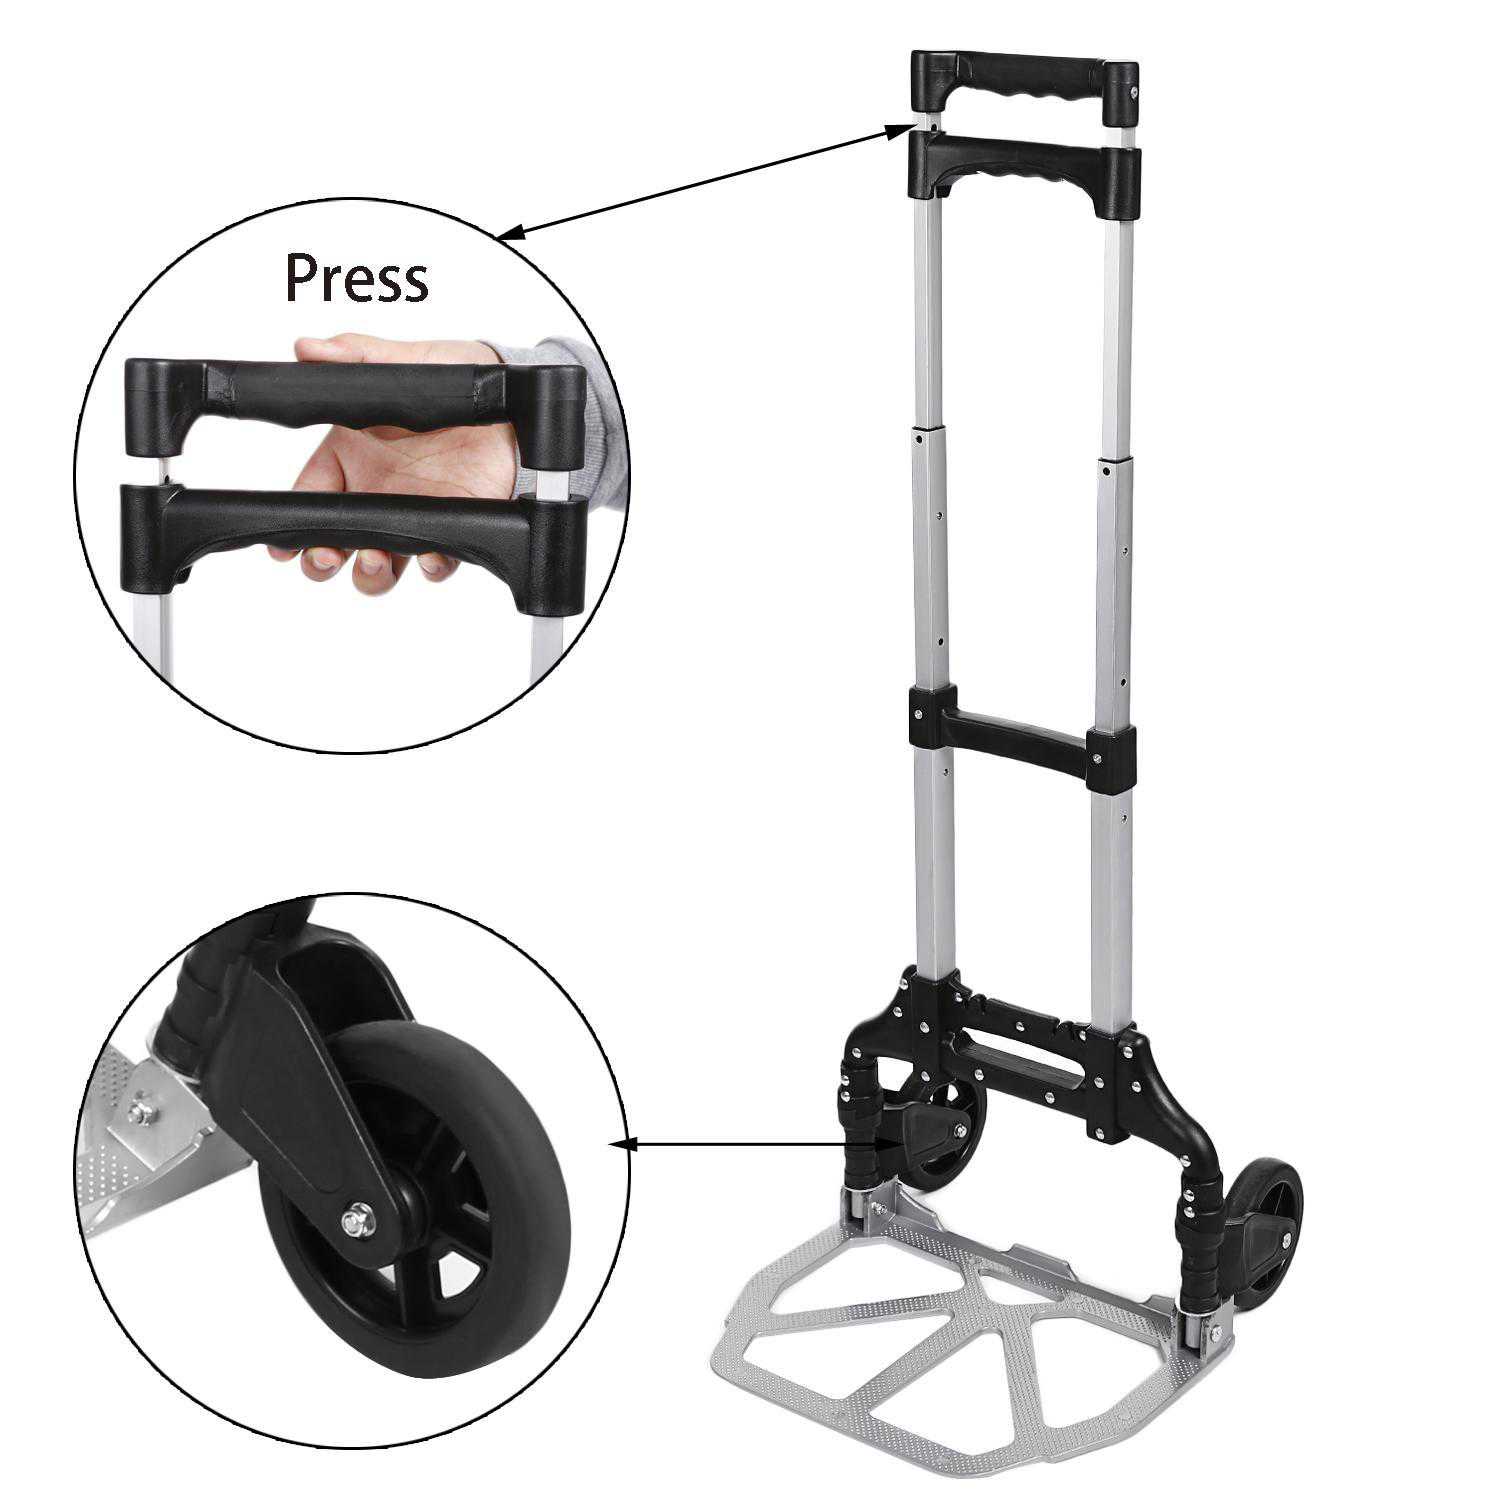 Telescoping Portable Folding Hand Truck Dolly Luggage Carts Aluminum Alloy,150 lbs